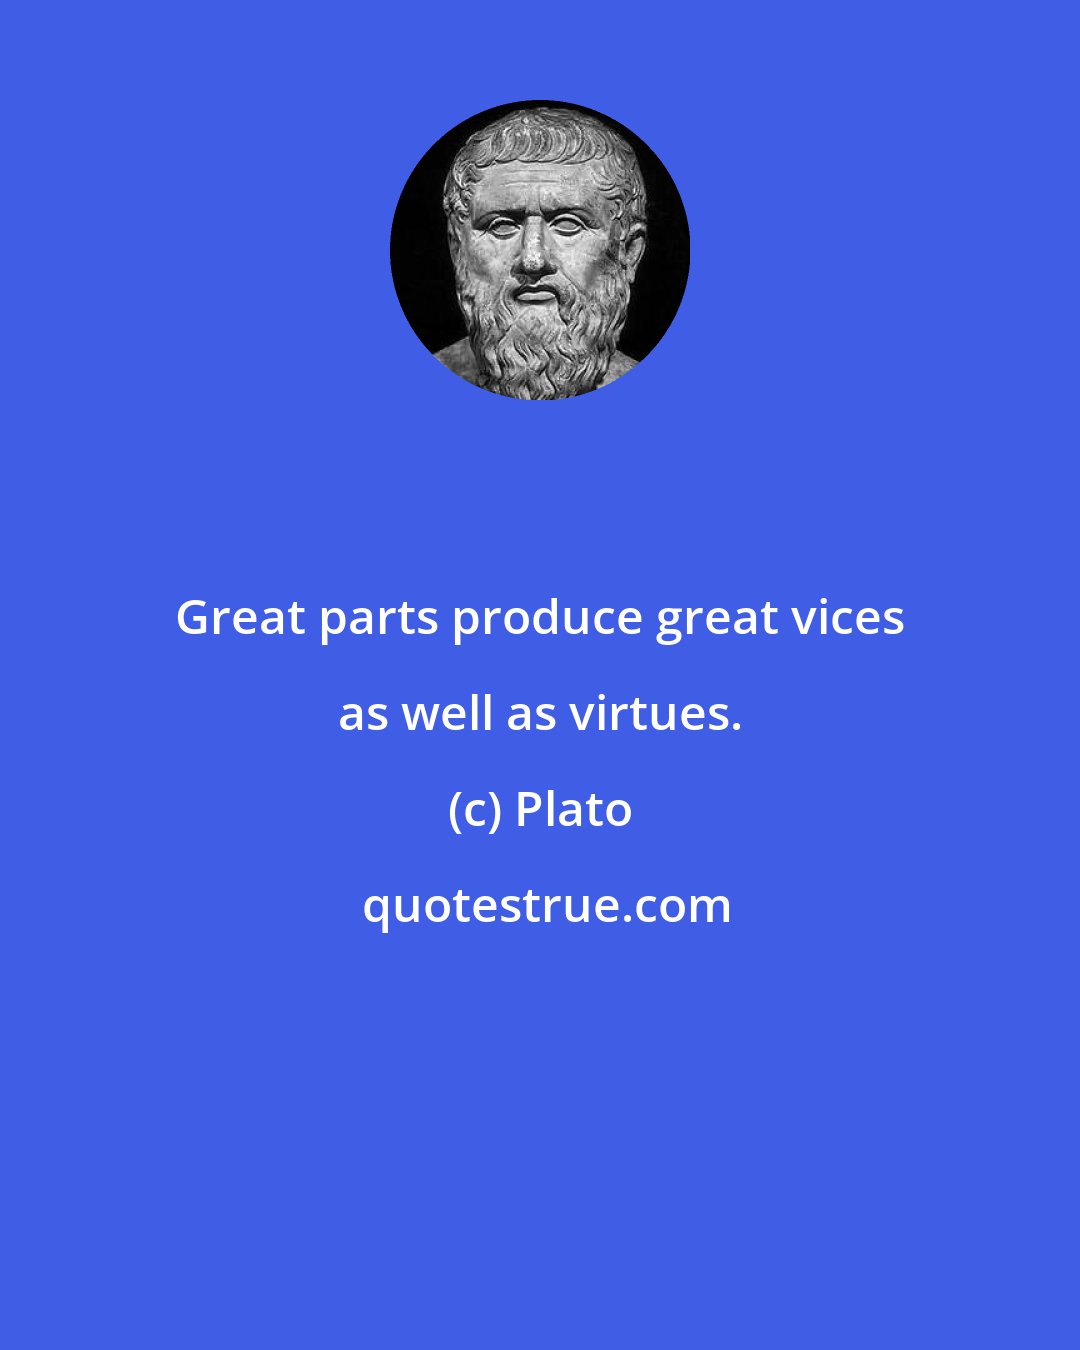 Plato: Great parts produce great vices as well as virtues.